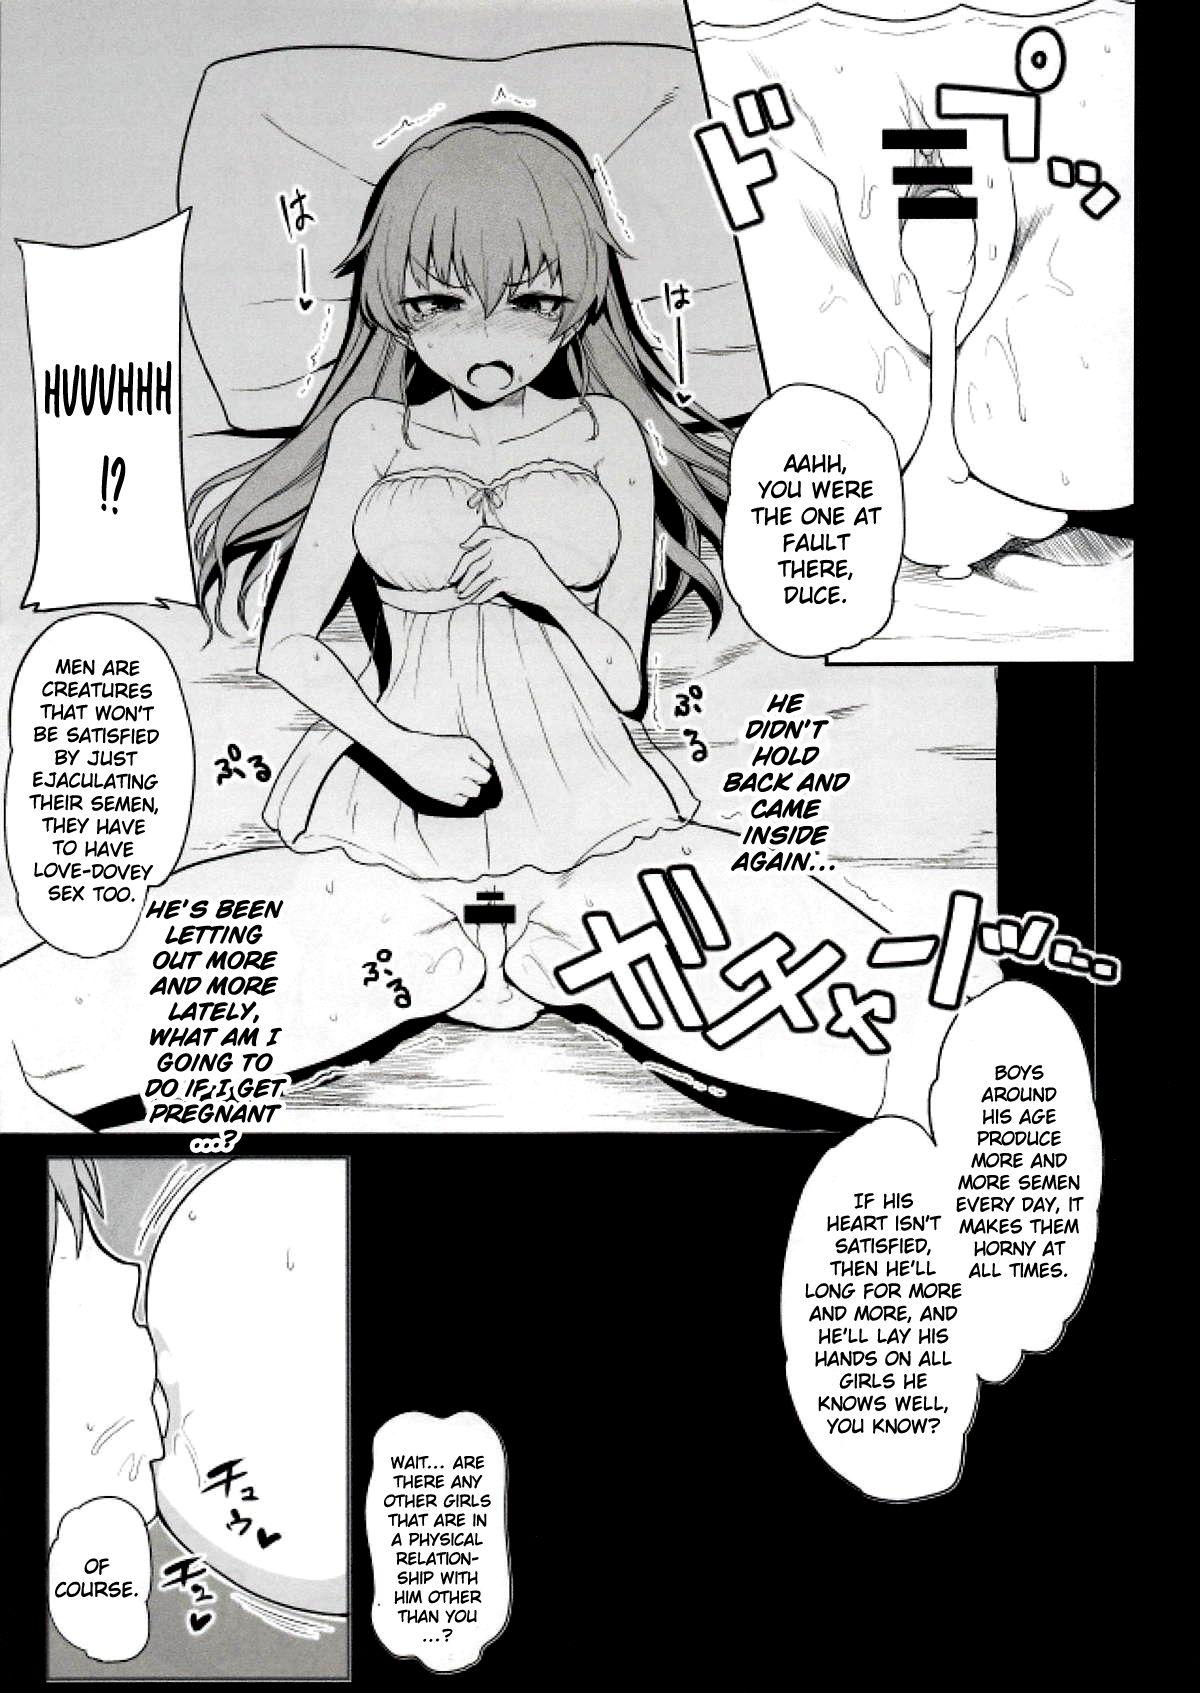 Anal Licking Raise wa Duce no Otouto ni Naritai | I Want To Become Duce's Little Brother In The Future! - Girls und panzer Squirting - Page 5